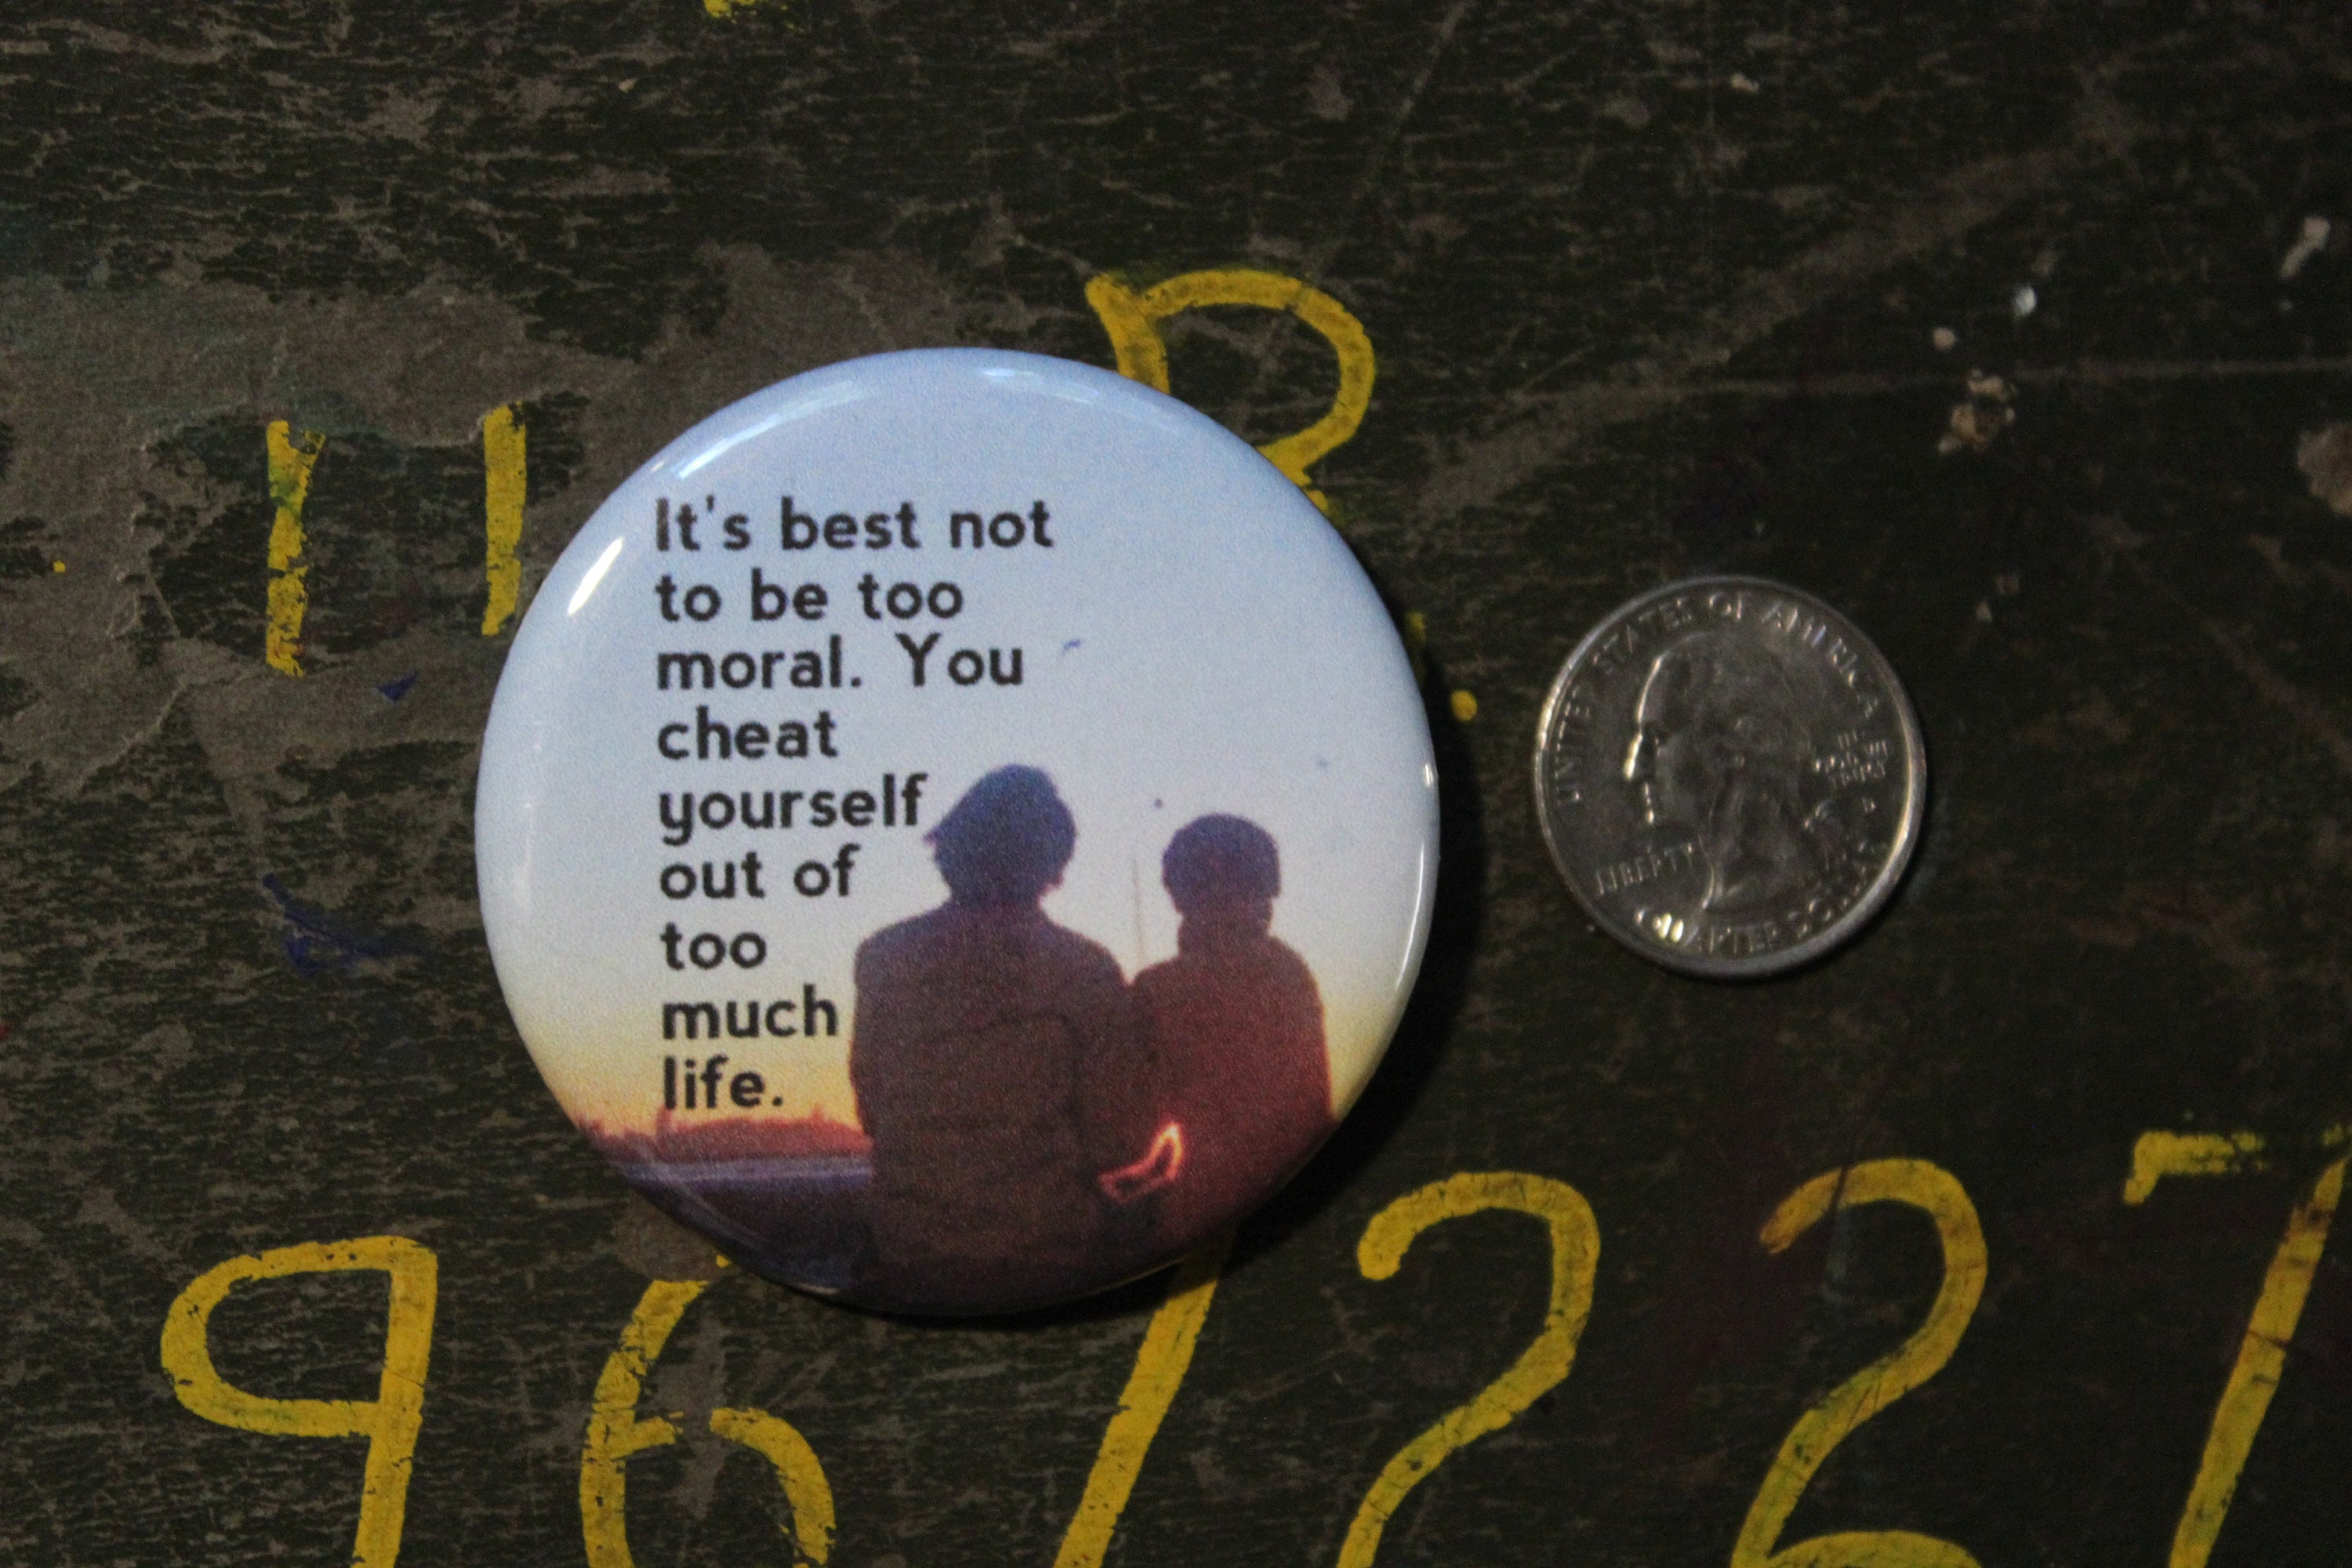 Harold and Maude 2.25 Button Keychain Magnet  Pin Badge Film Moral Cheat Yourself Out Of Life Vintage 1970s Movie Quotes Daisy Cult Large